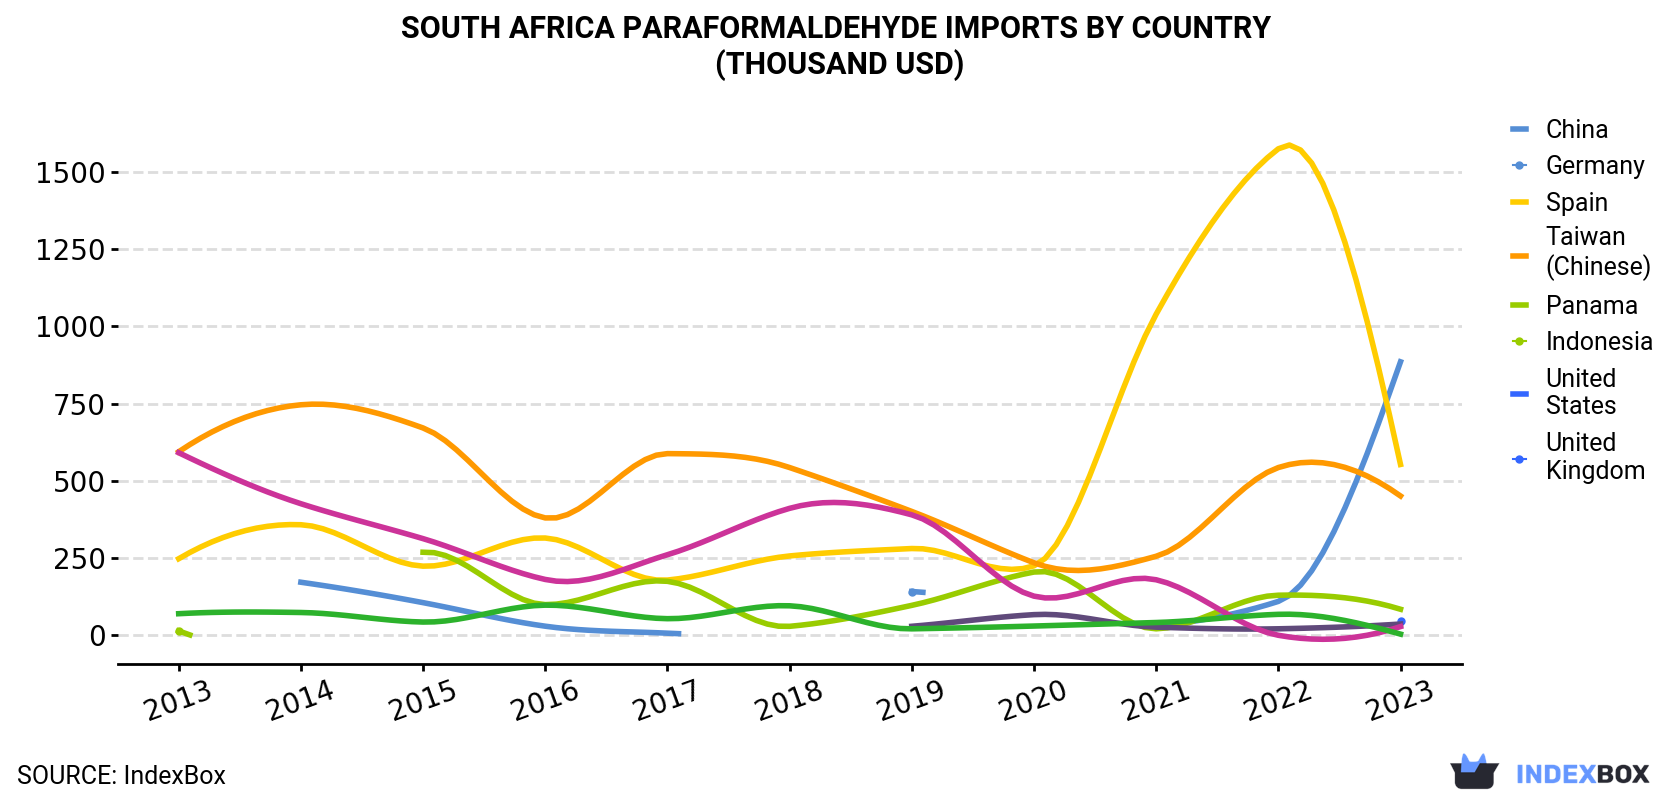 South Africa Paraformaldehyde Imports By Country (Thousand USD)